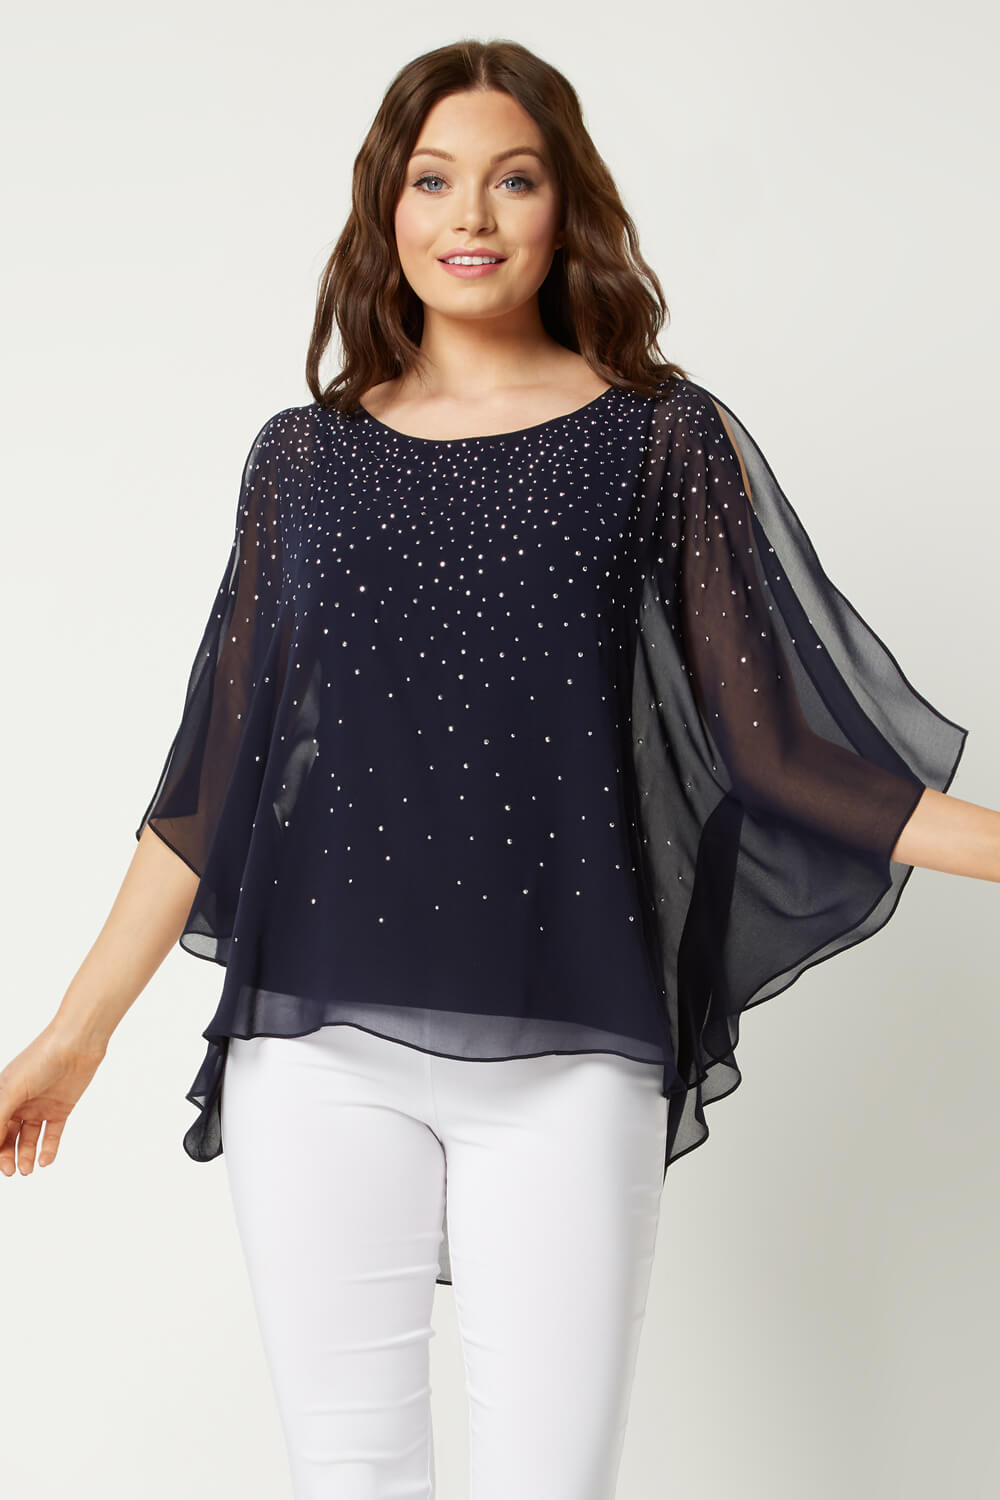 Navy  Sparkly Chiffon Overlay Top, Image 3 of 4